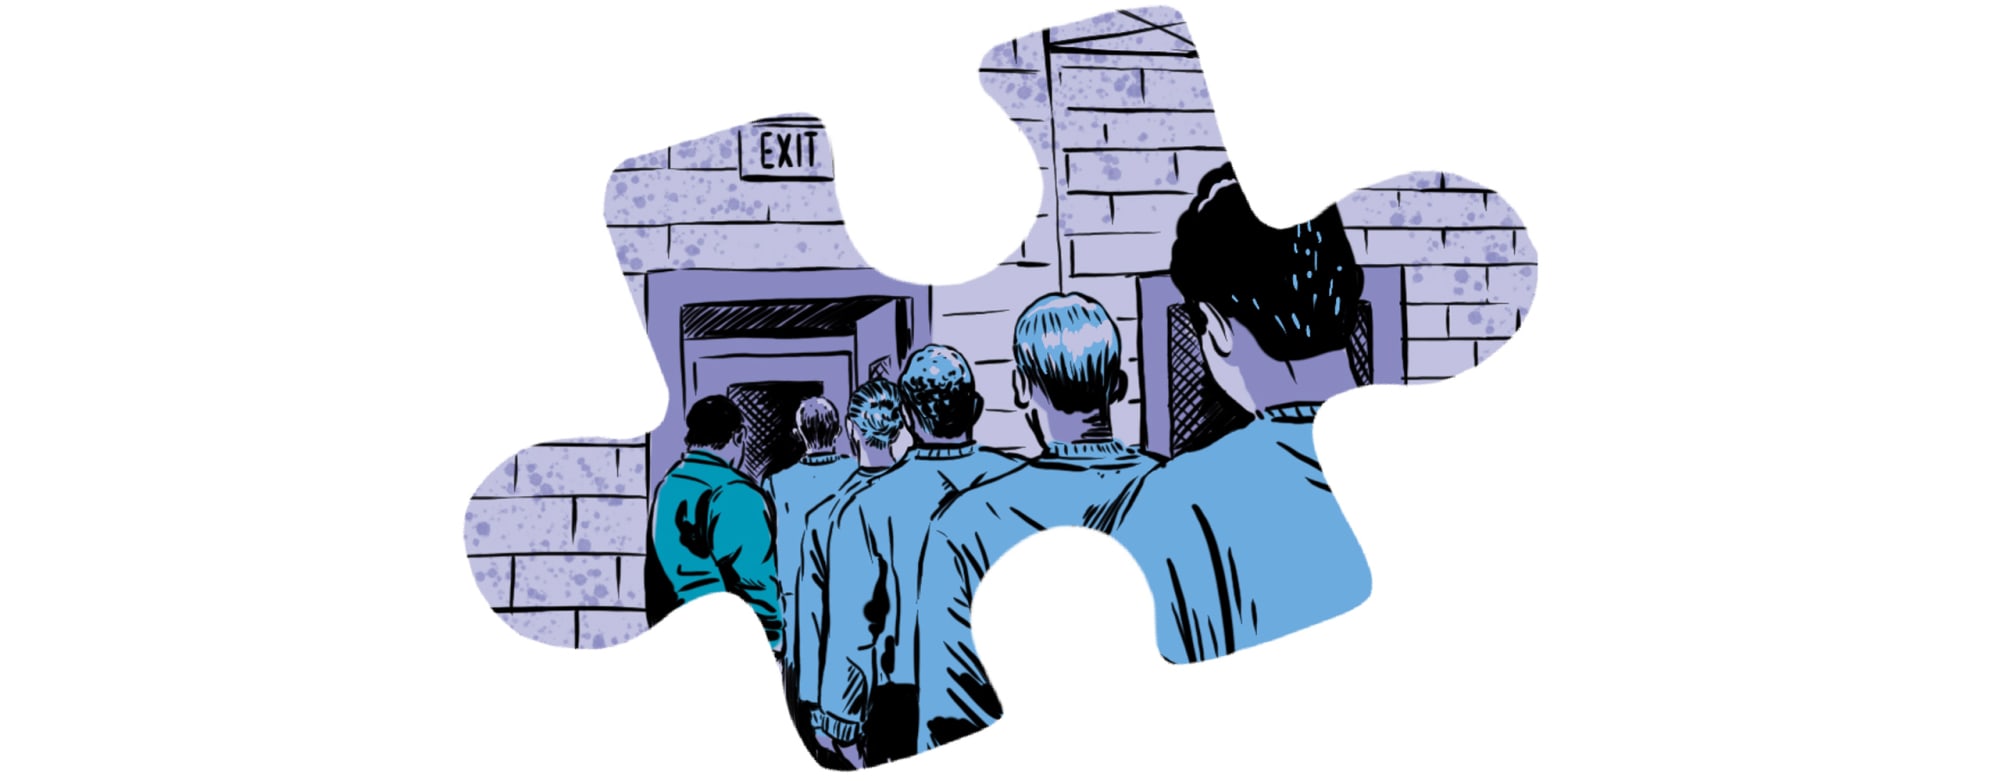 Dark graphic novel style illustration of teens lined up inside a youth justice residence framed in a puzzle piece.